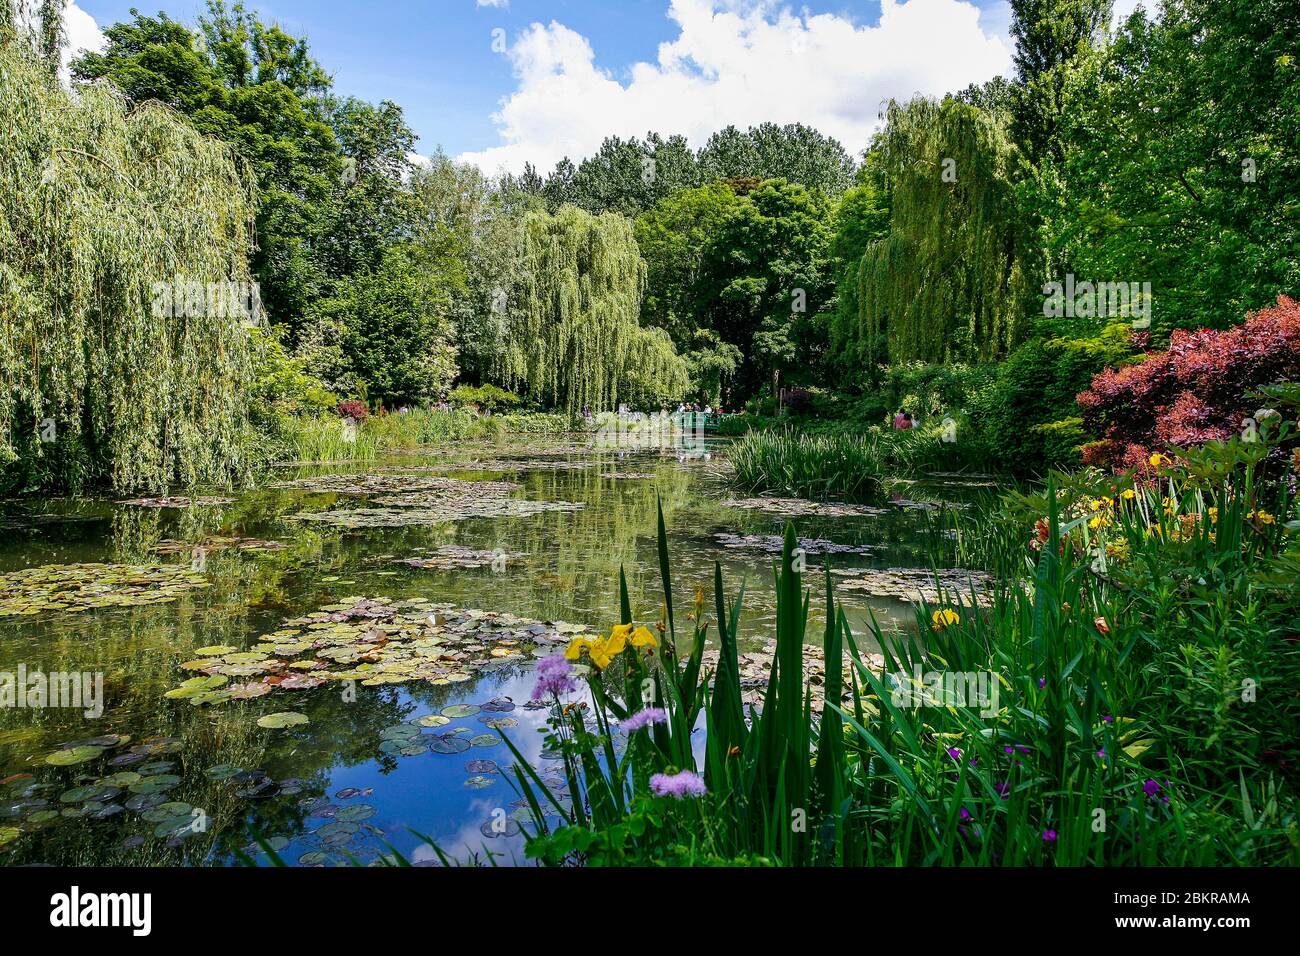 France, Eure, Giverny, Claude Monet's House and Gardens, The Water Garden Stock Photo